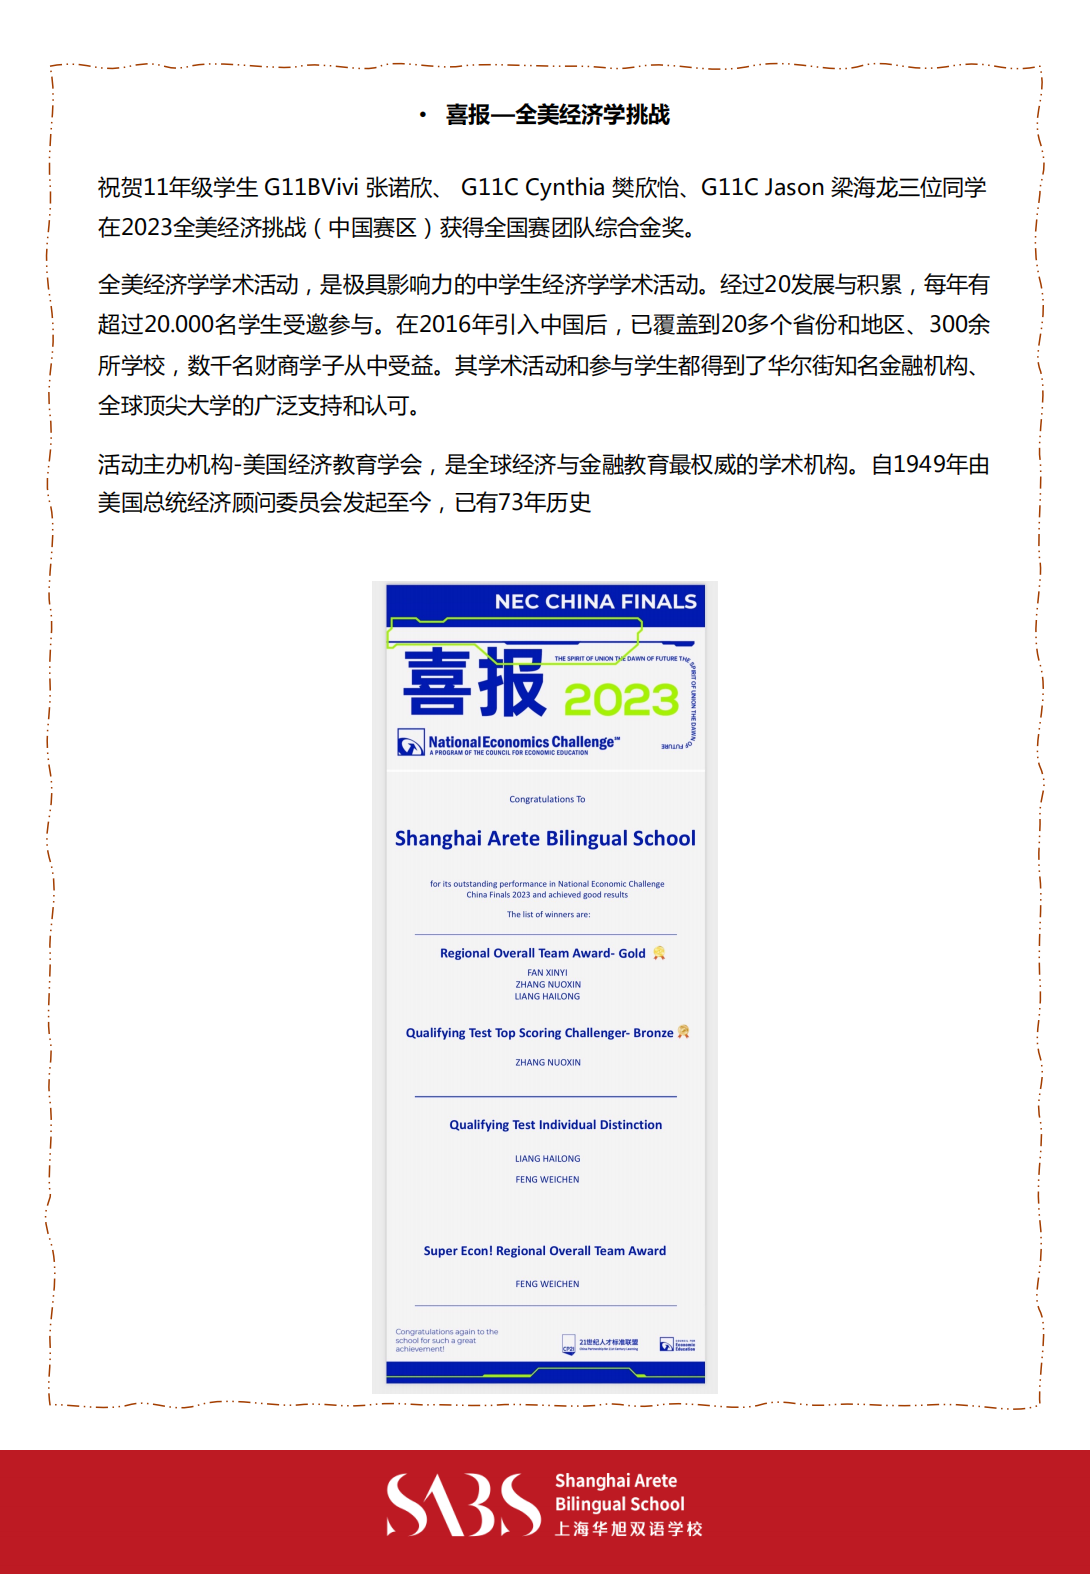 HS 5th Issue Newsletter pptx（Chinese)_15.png